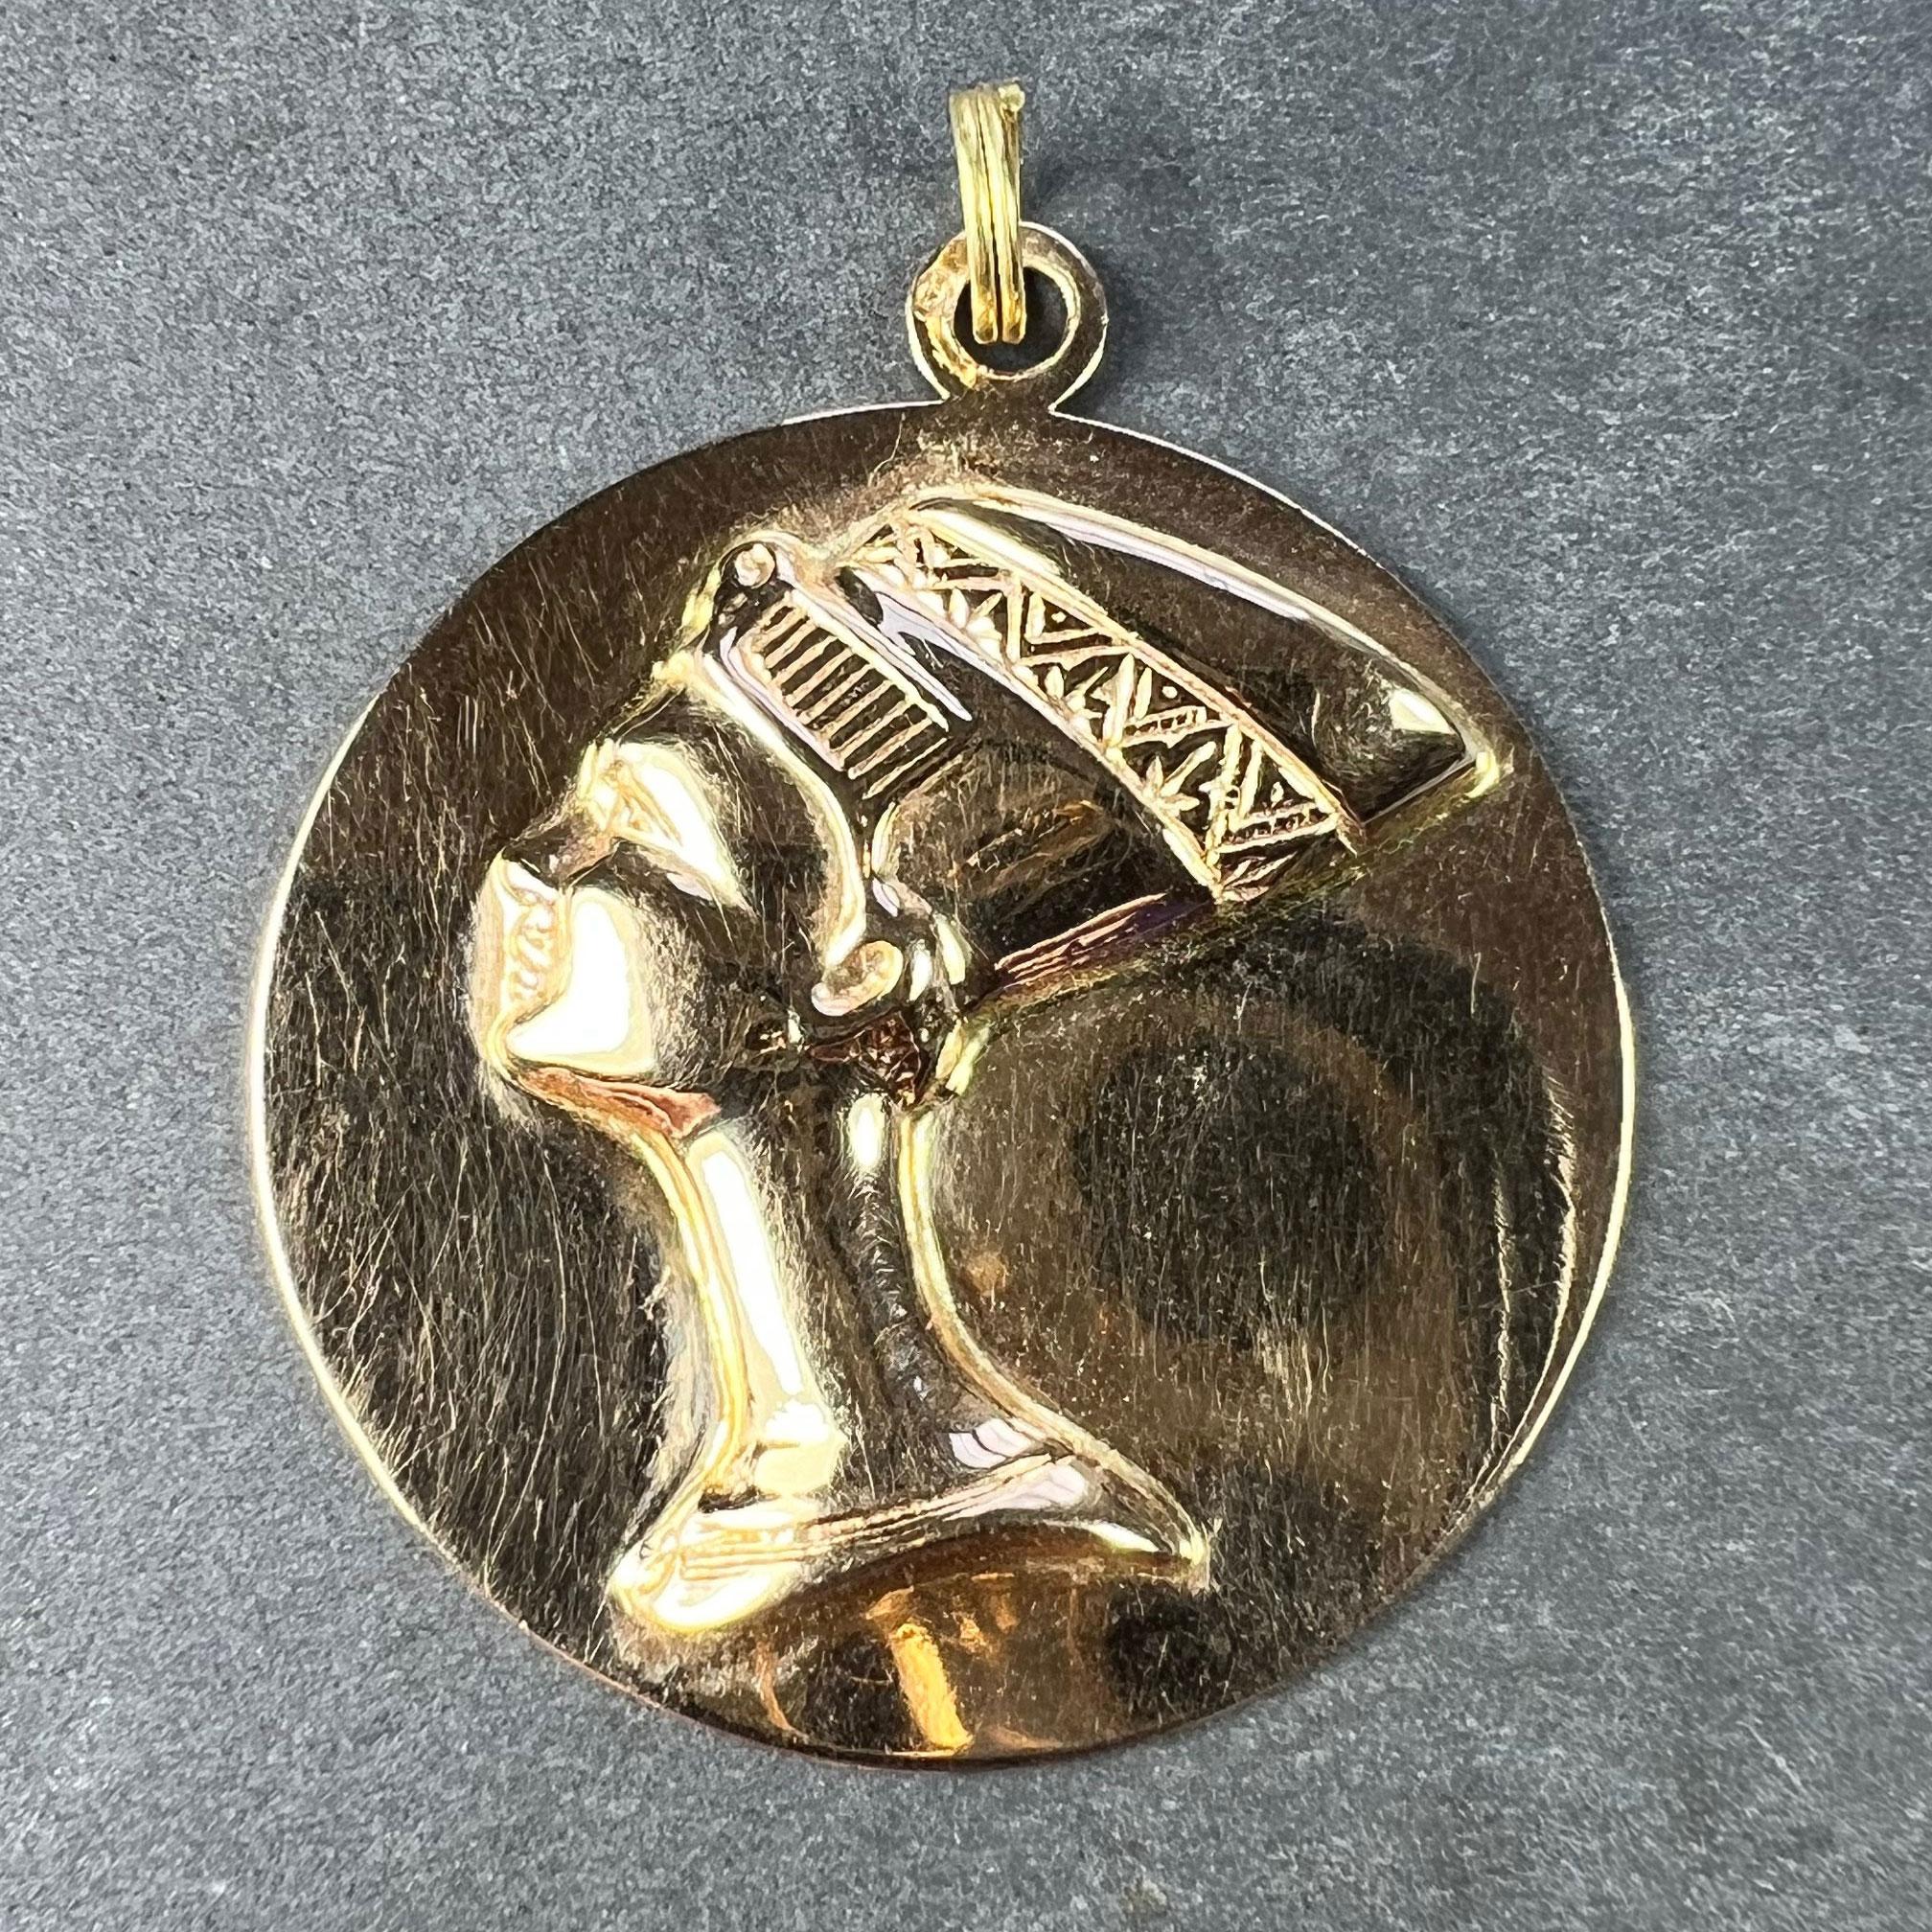 A large Italian 18 karat (18K) yellow gold charm pendant designed as a three dimensional bust of the head of Queen Nefertiti in profile within a flat gold circle. Stamped with the Italian maker's mark 226VI indicating manufacture in Vincenza after